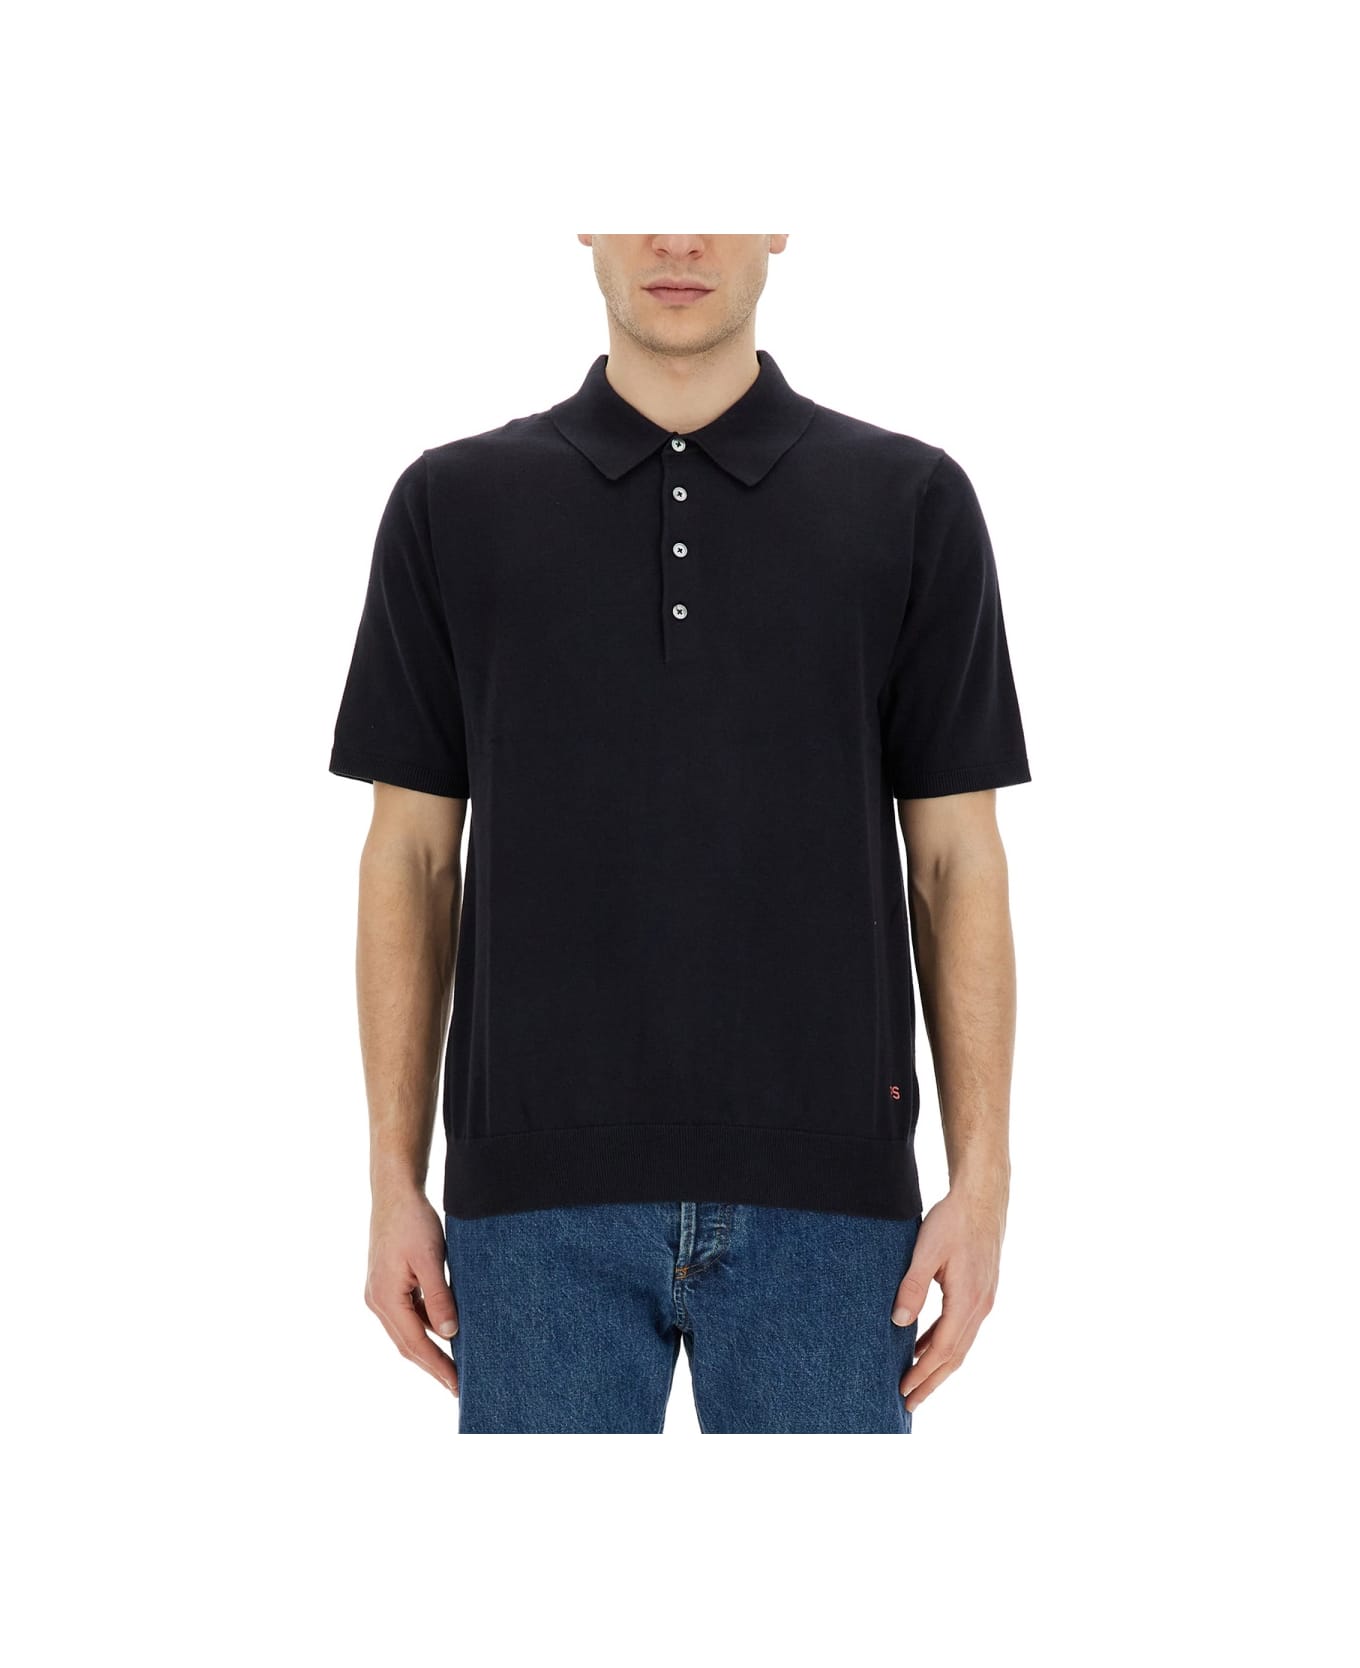 PS by Paul Smith Regular Fit Polo Shirt - BLUE ポロシャツ